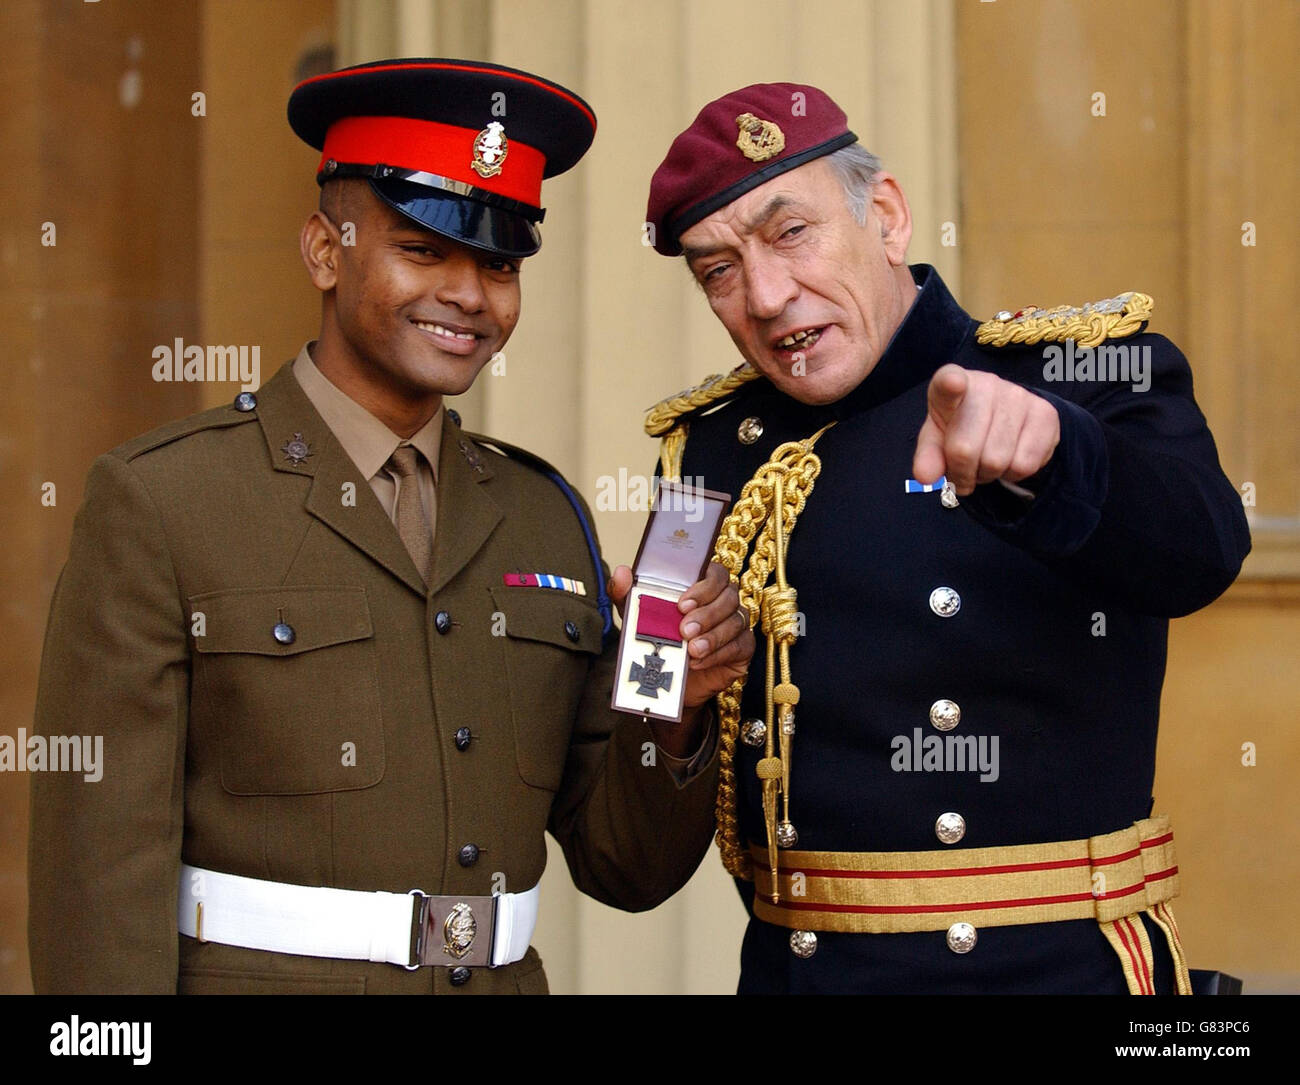 Iraq war hero Private Johnson Beharry with his Victoria Cross and General Sir Mike Jackson. Stock Photo